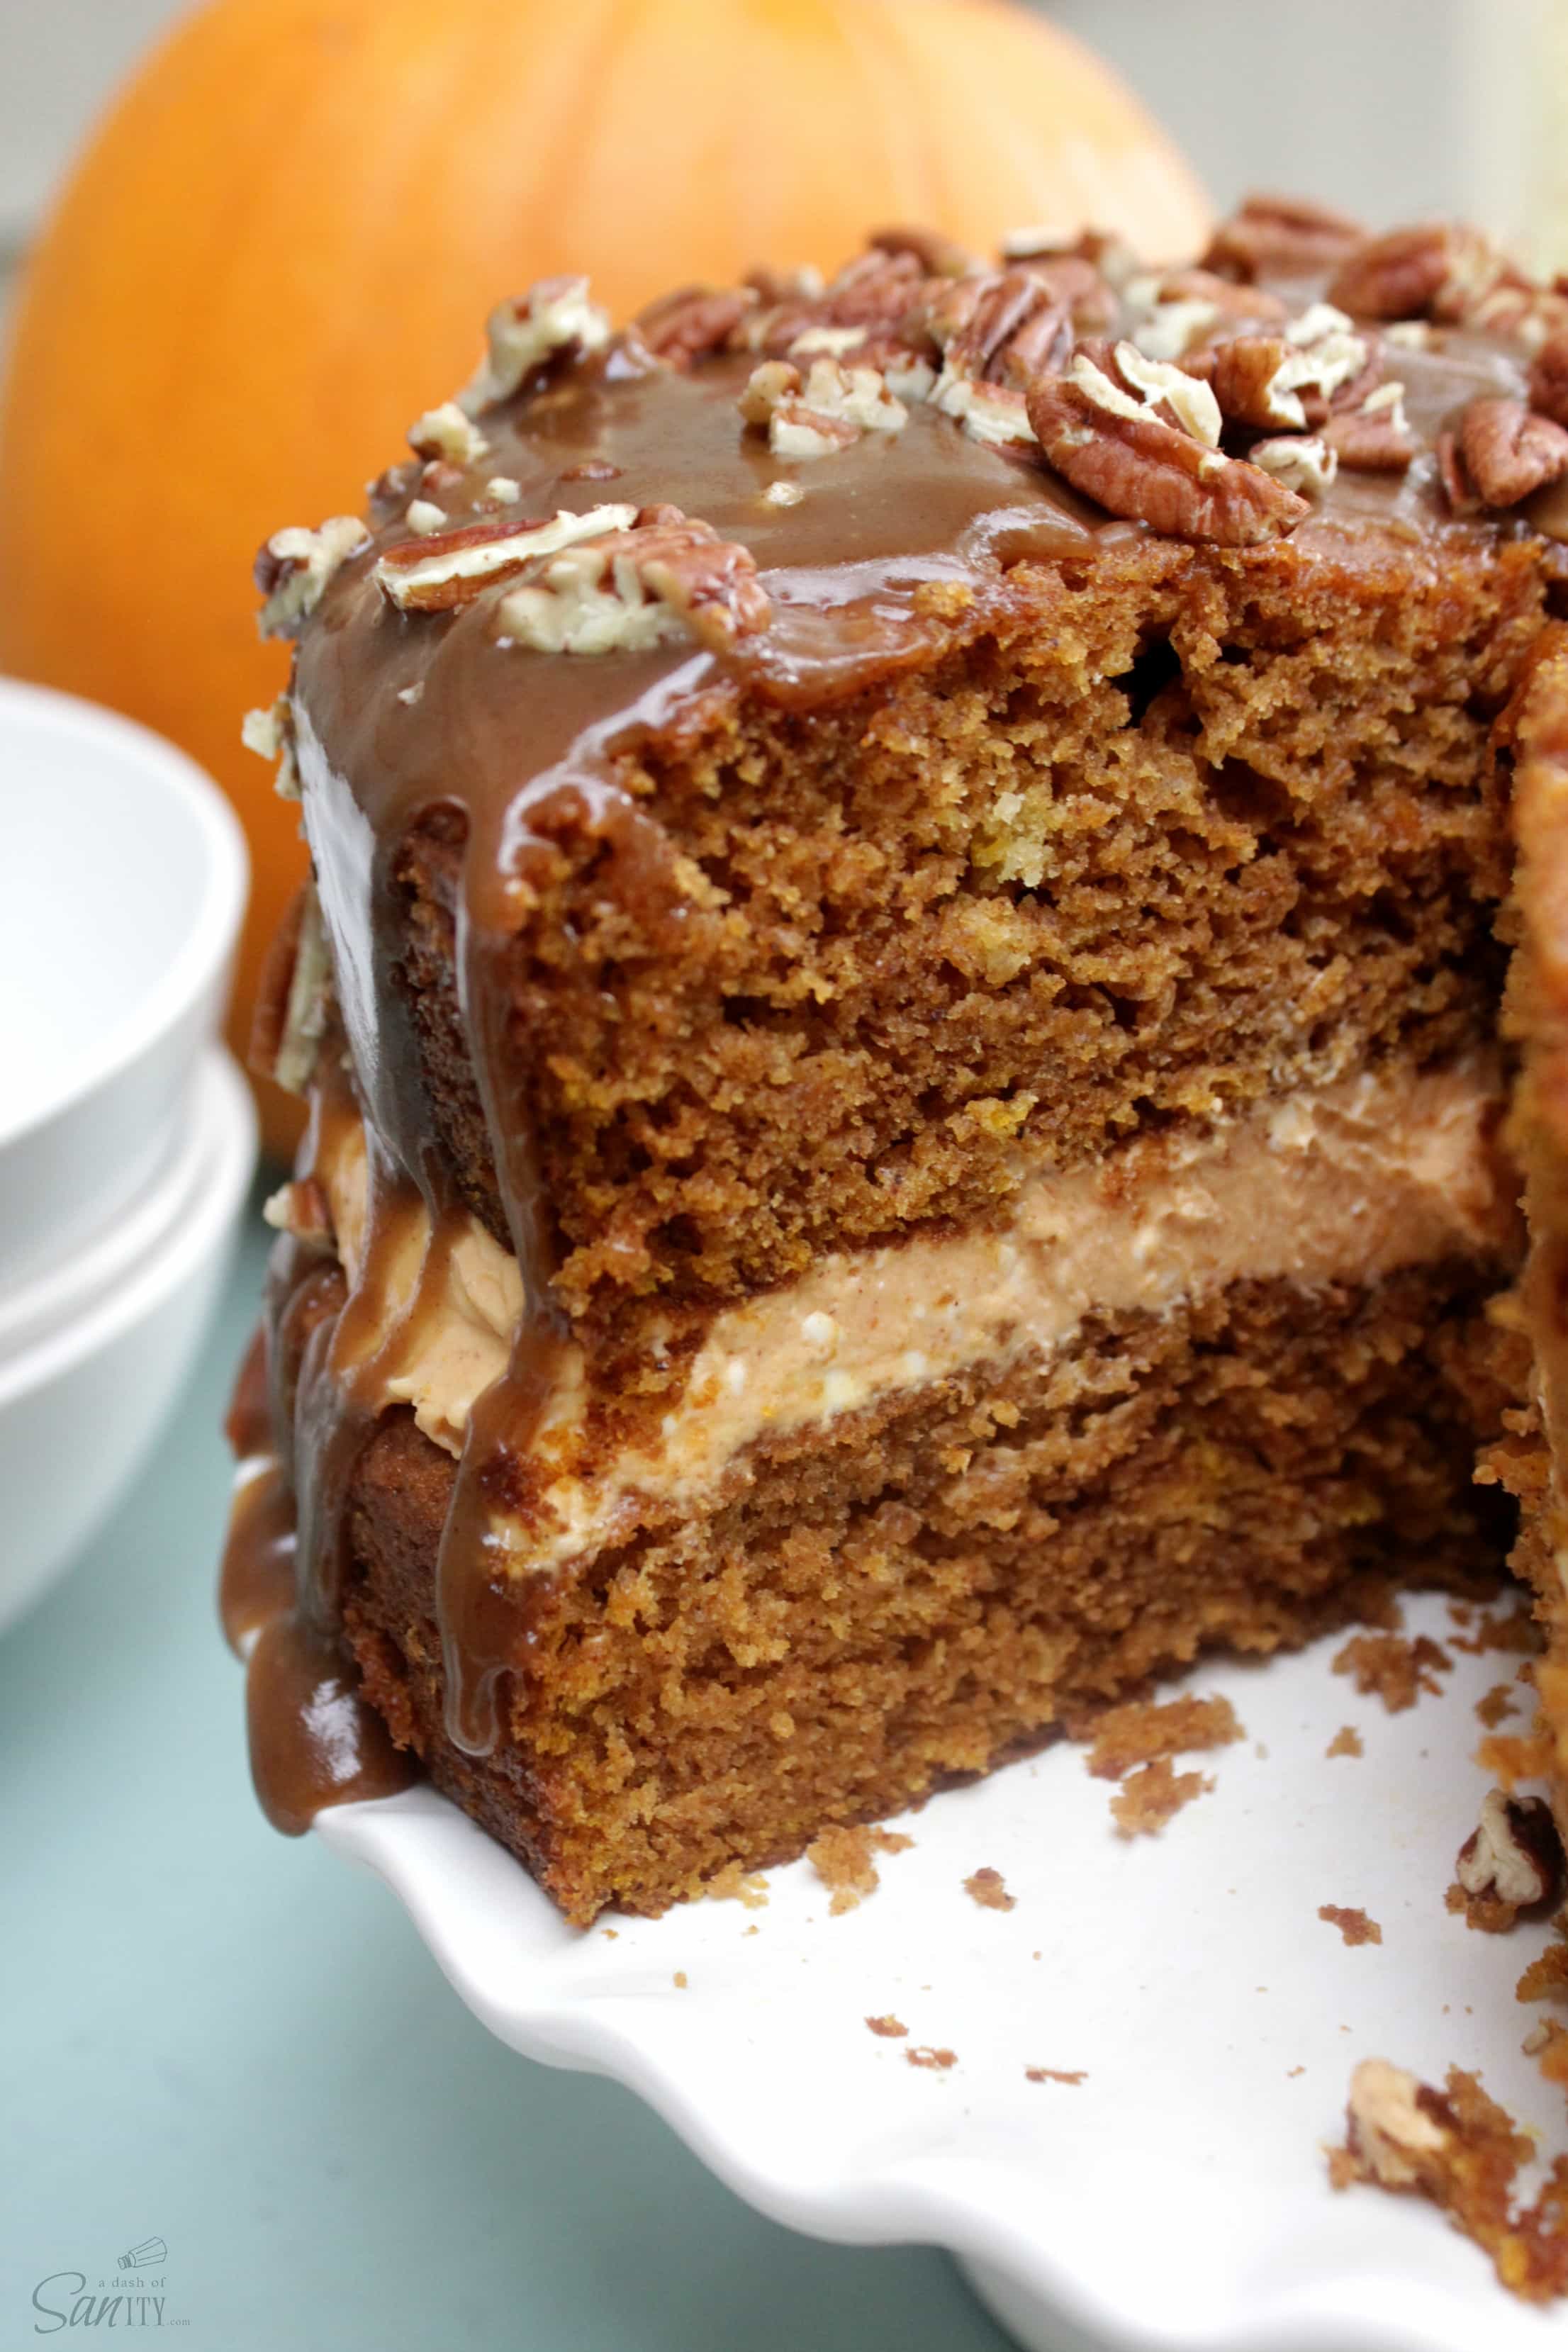 This delicious Caramel Pecan Pumpkin Cake is topped with pumpkin spice caramel sauce & pecans. With this, fall just became your new favorite season.